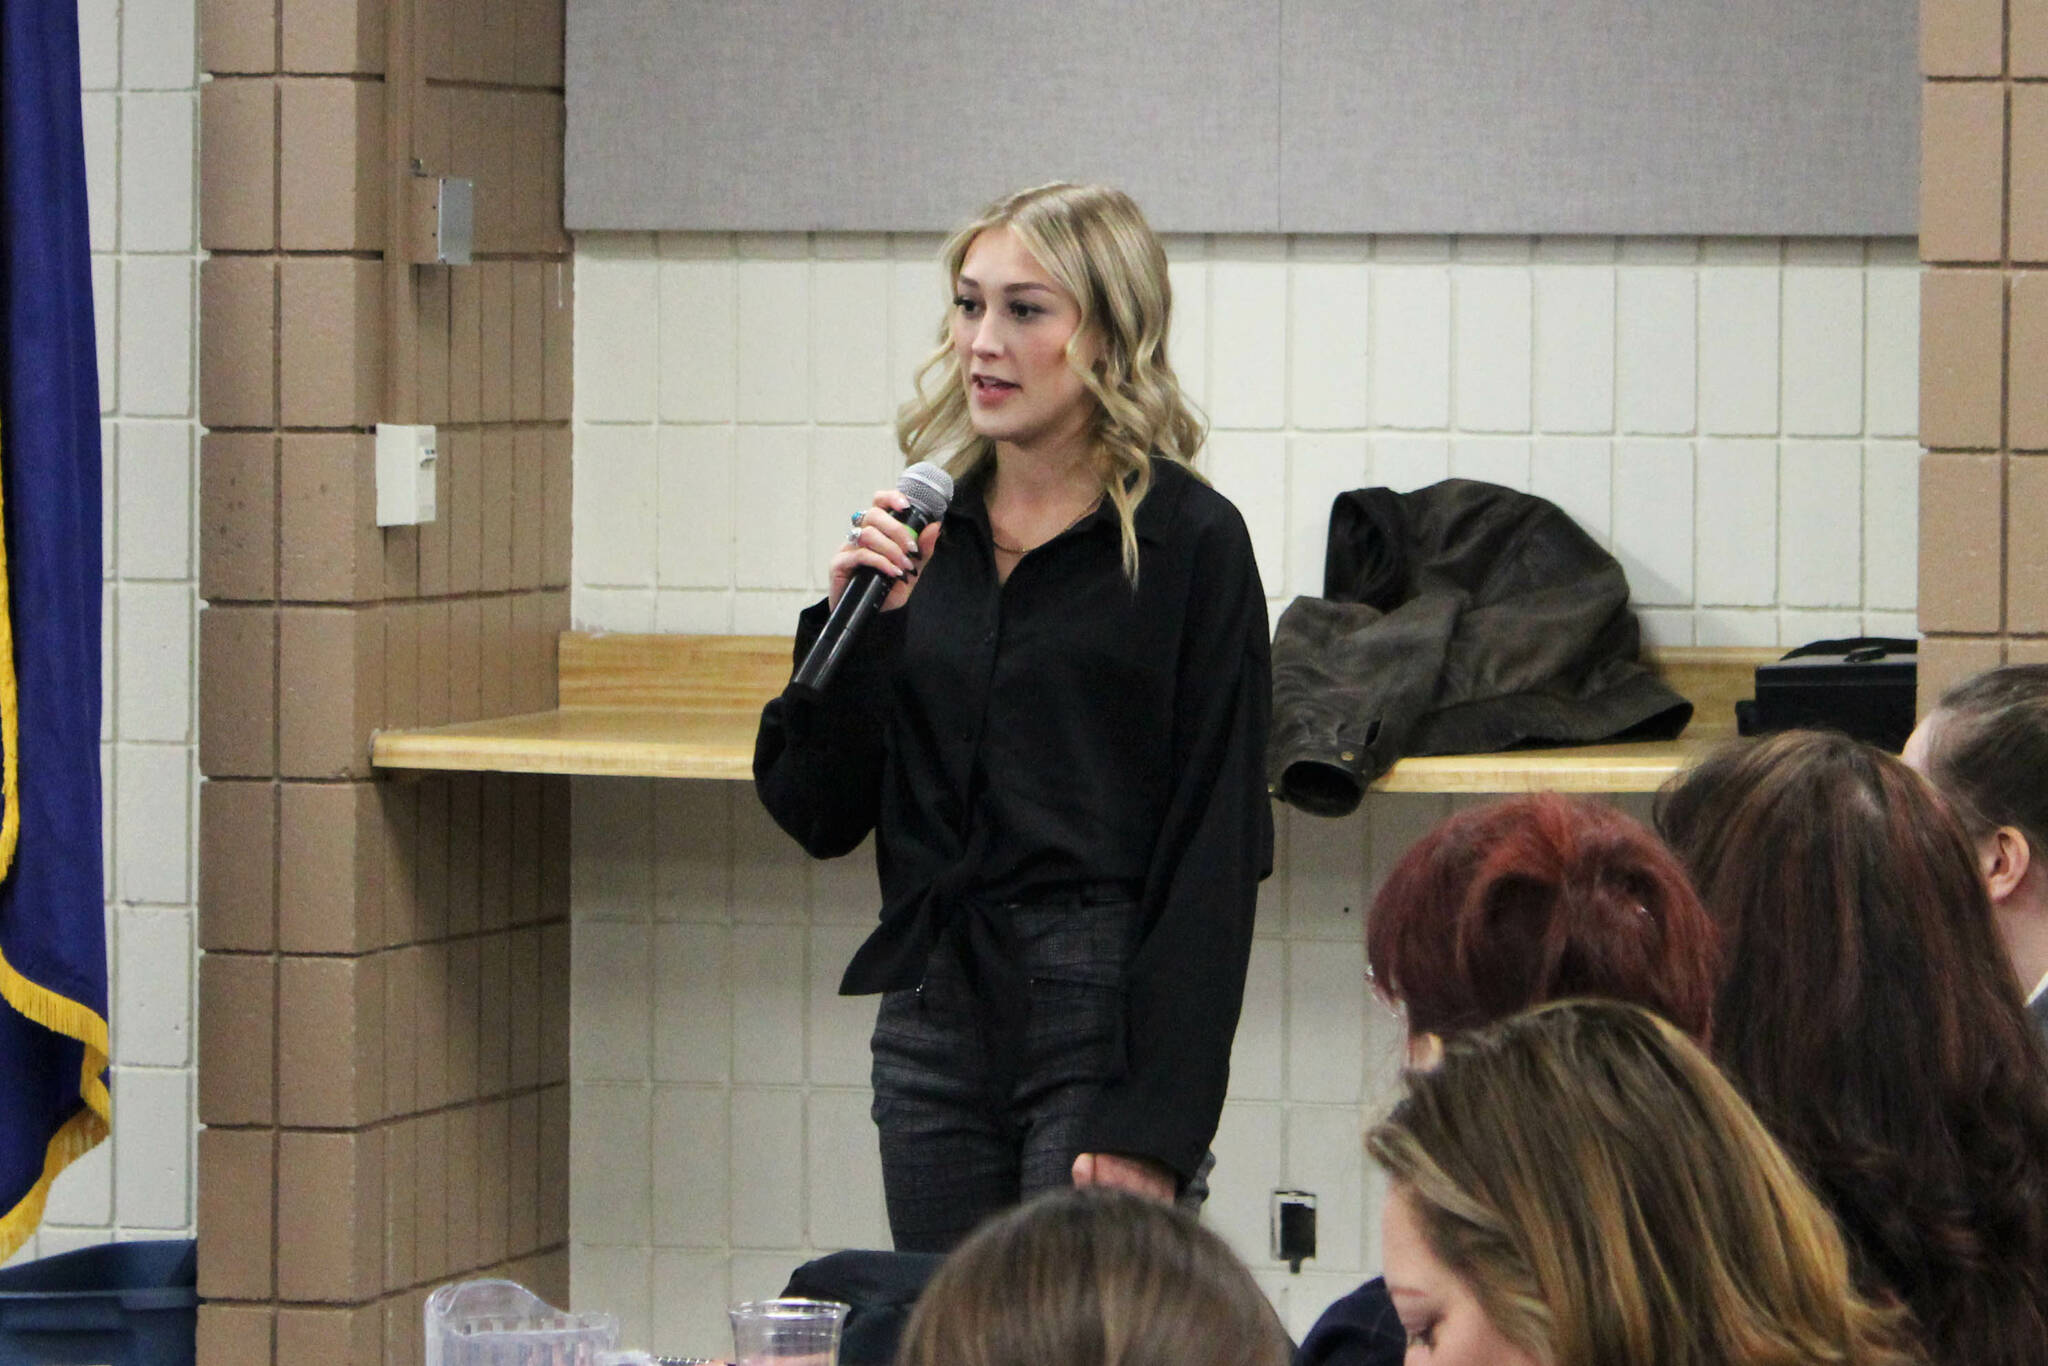 Incoming Soldotna Chamber of Commerce Executive Director Maddy McElrea addresses attendees at a chamber luncheon on Wednesday, Feb. 8, 2023 in Soldotna, Alaska. (Ashlyn O’Hara/Peninsula Clarion)